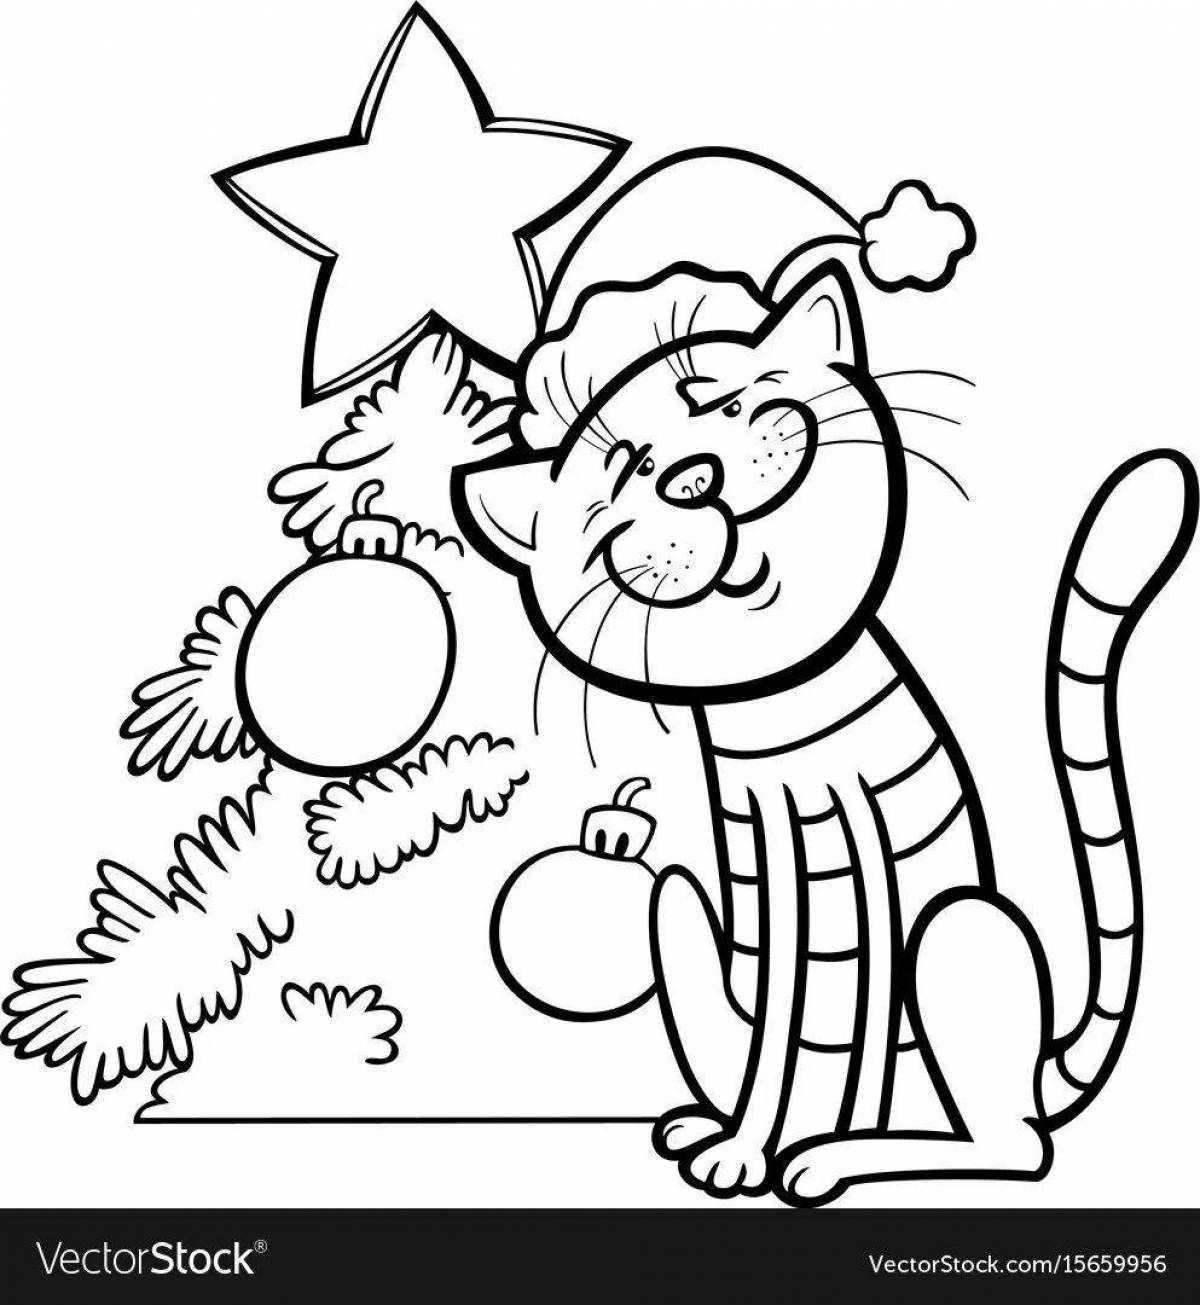 Fancy cat Christmas coloring book